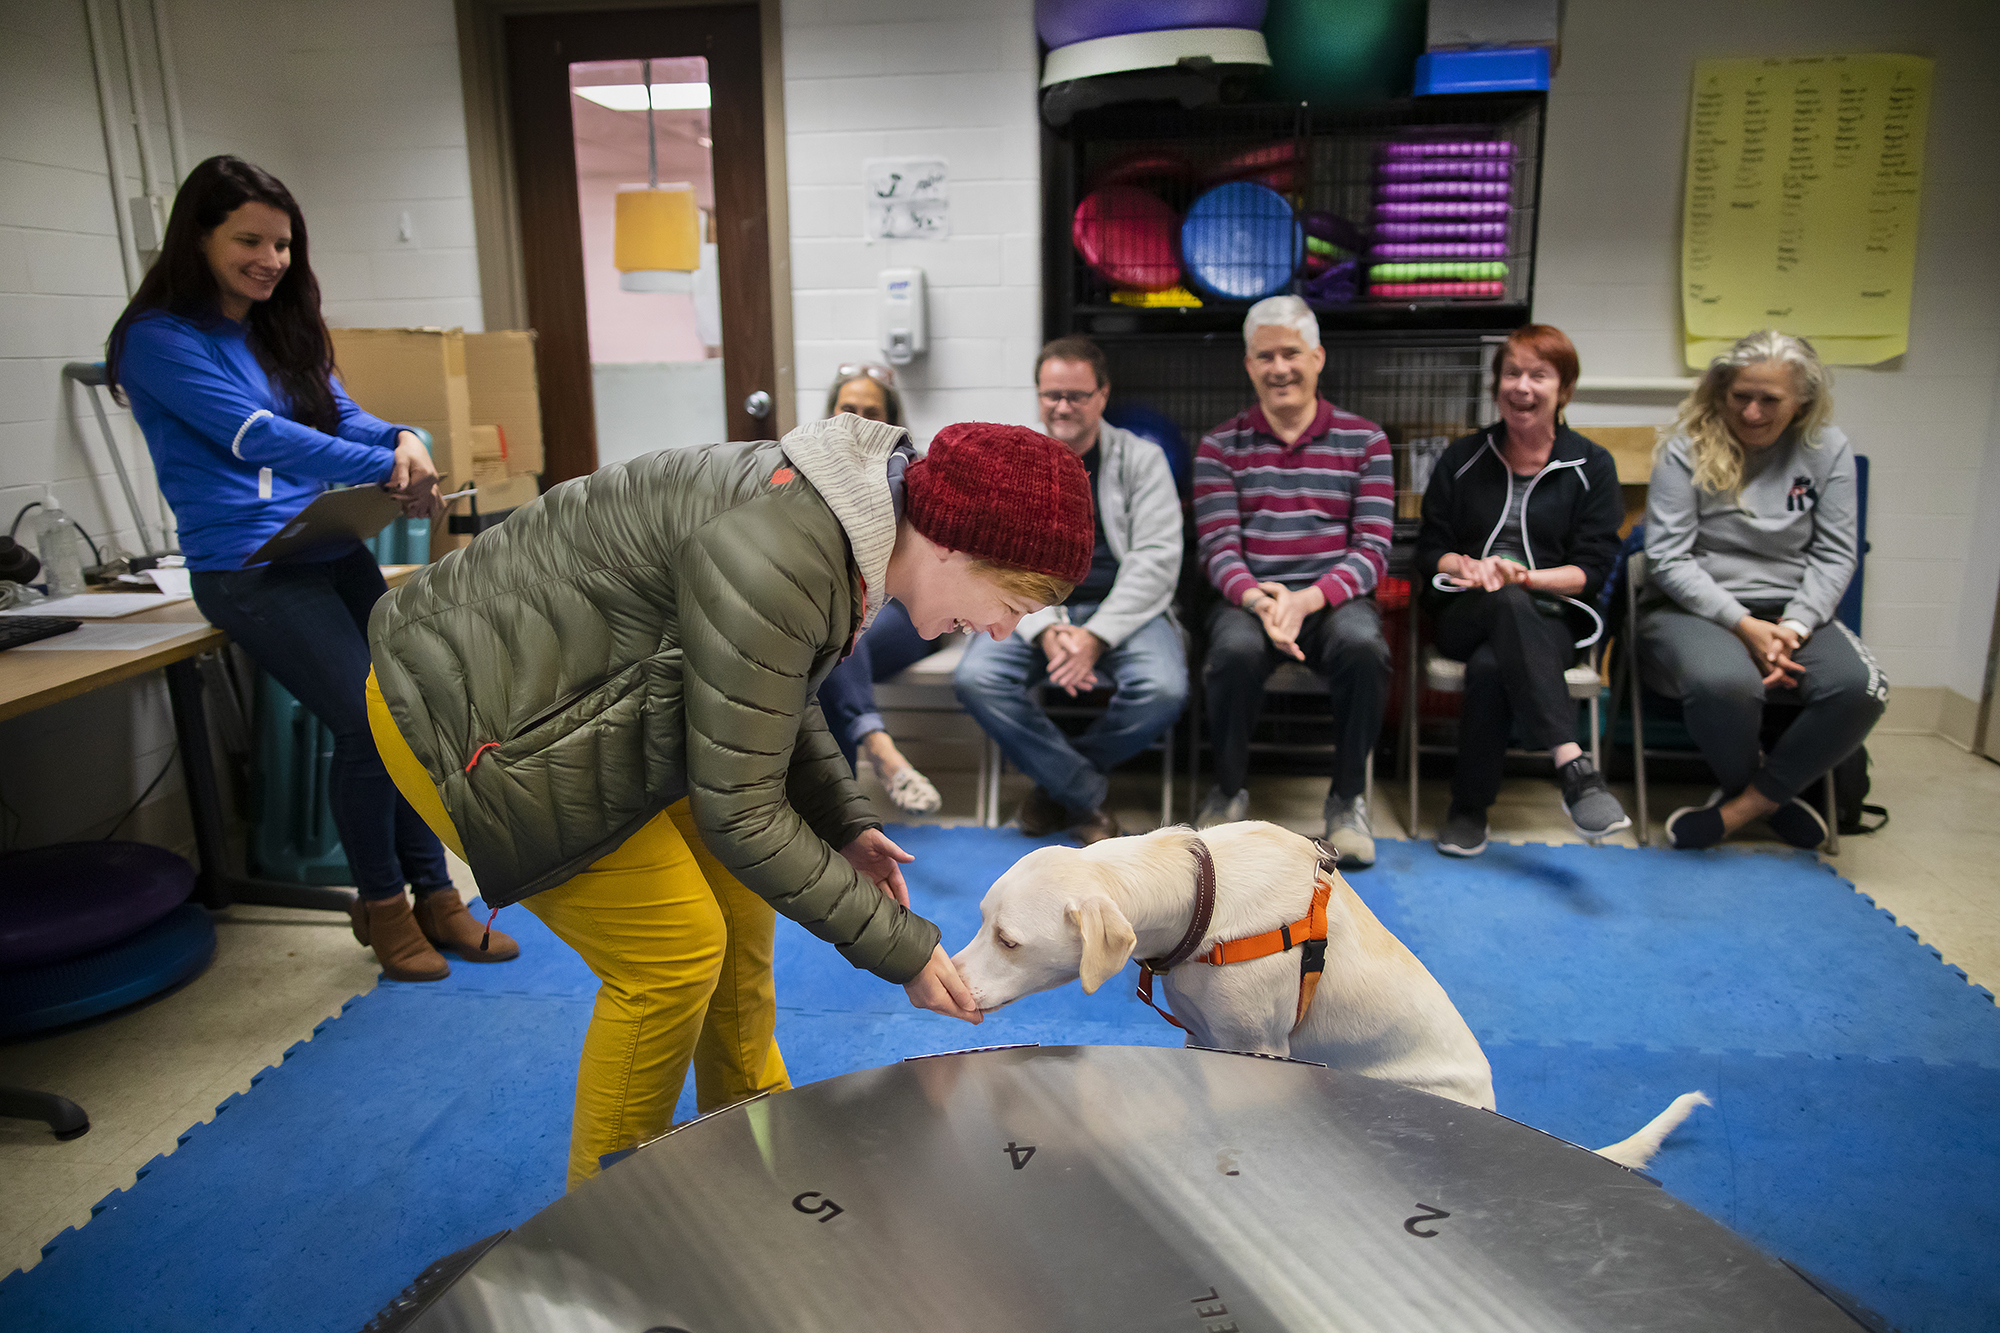 Melissa Hopkins leans over to give a treat to her dog Cedar as instructor Meghan Ramos and other class participants look on